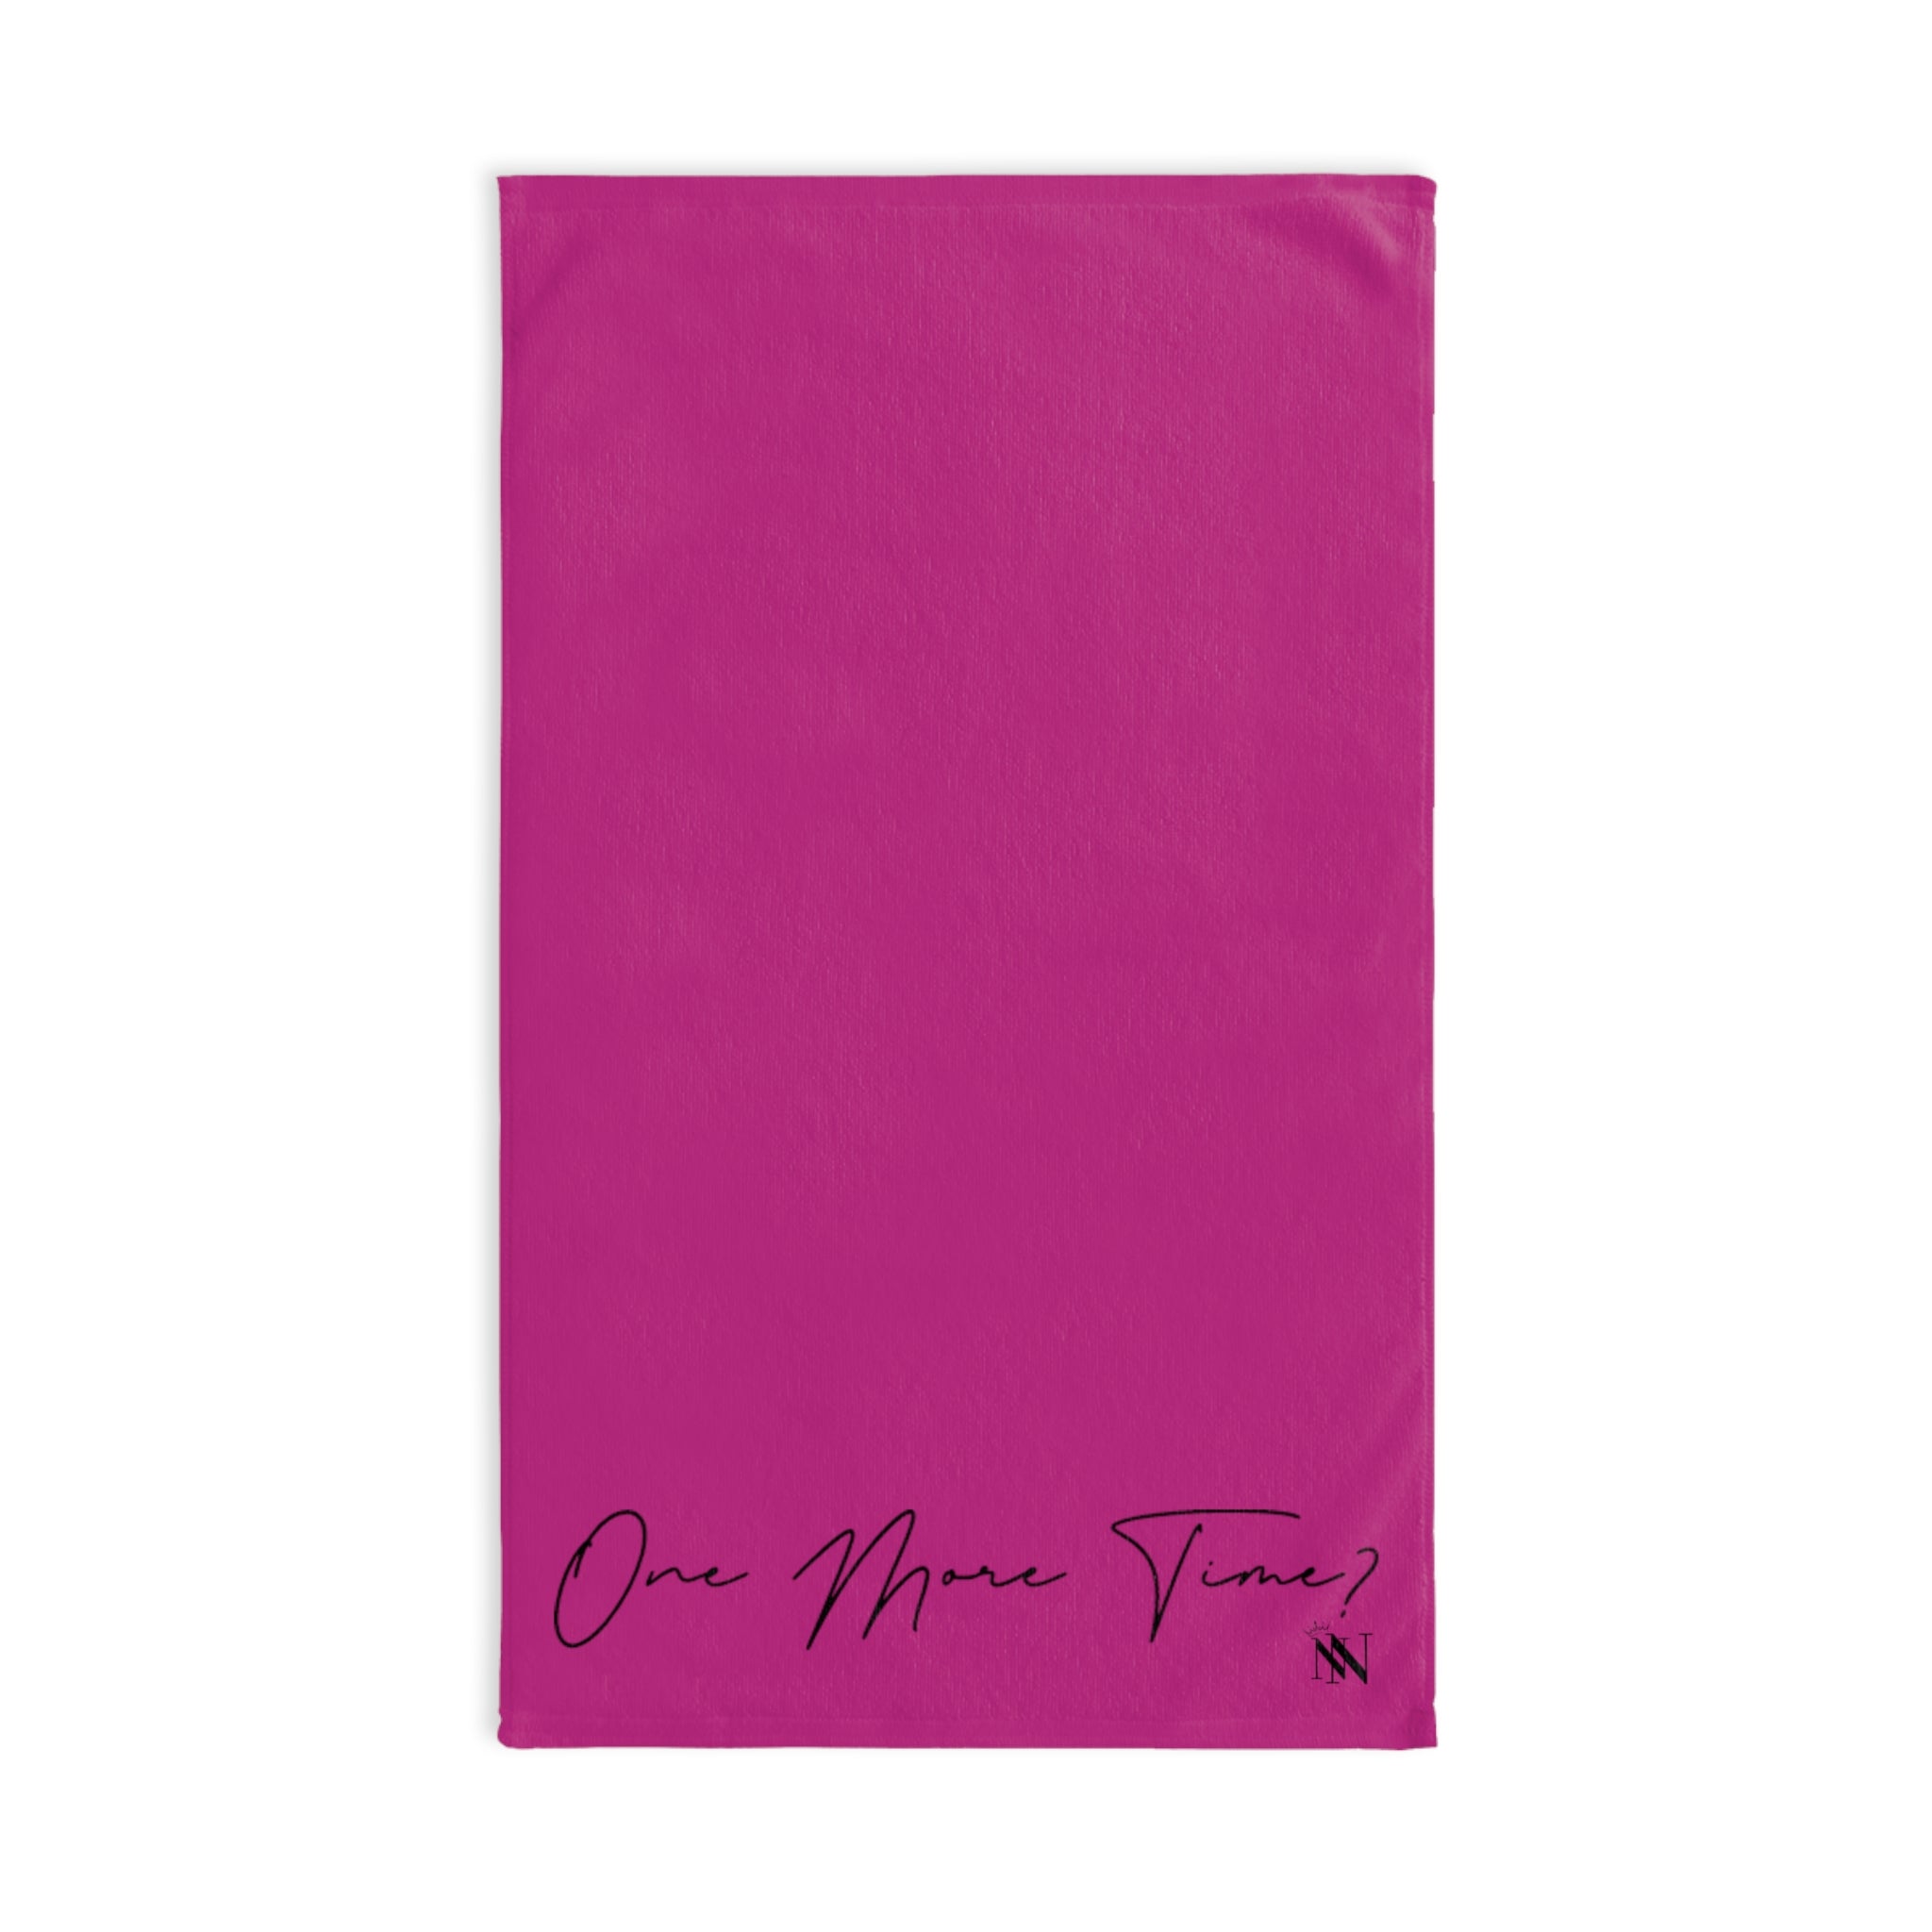 One More Time? Fuscia | Funny Gifts for Men - Gifts for Him - Birthday Gifts for Men, Him, Husband, Boyfriend, New Couple Gifts, Fathers & Valentines Day Gifts, Hand Towels NECTAR NAPKINS